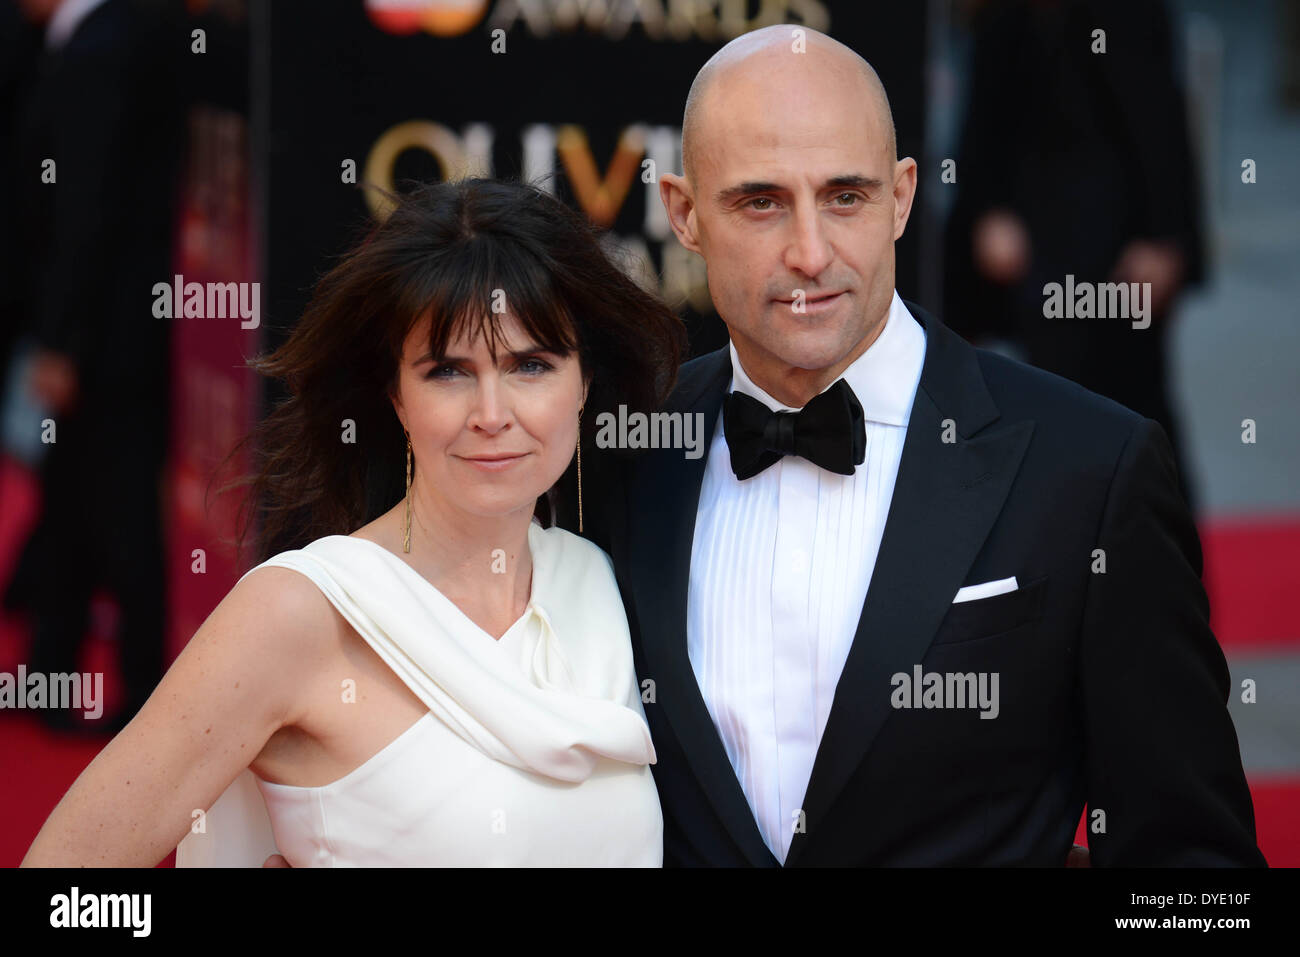 LONDON, ENGLAND - APRIL 13: Liza Marshall; Mark Strong attends the Laurence Olivier Awards at The Royal Opera House on April 13, 2014 in London, England. (Photo by See Li) Stock Photo